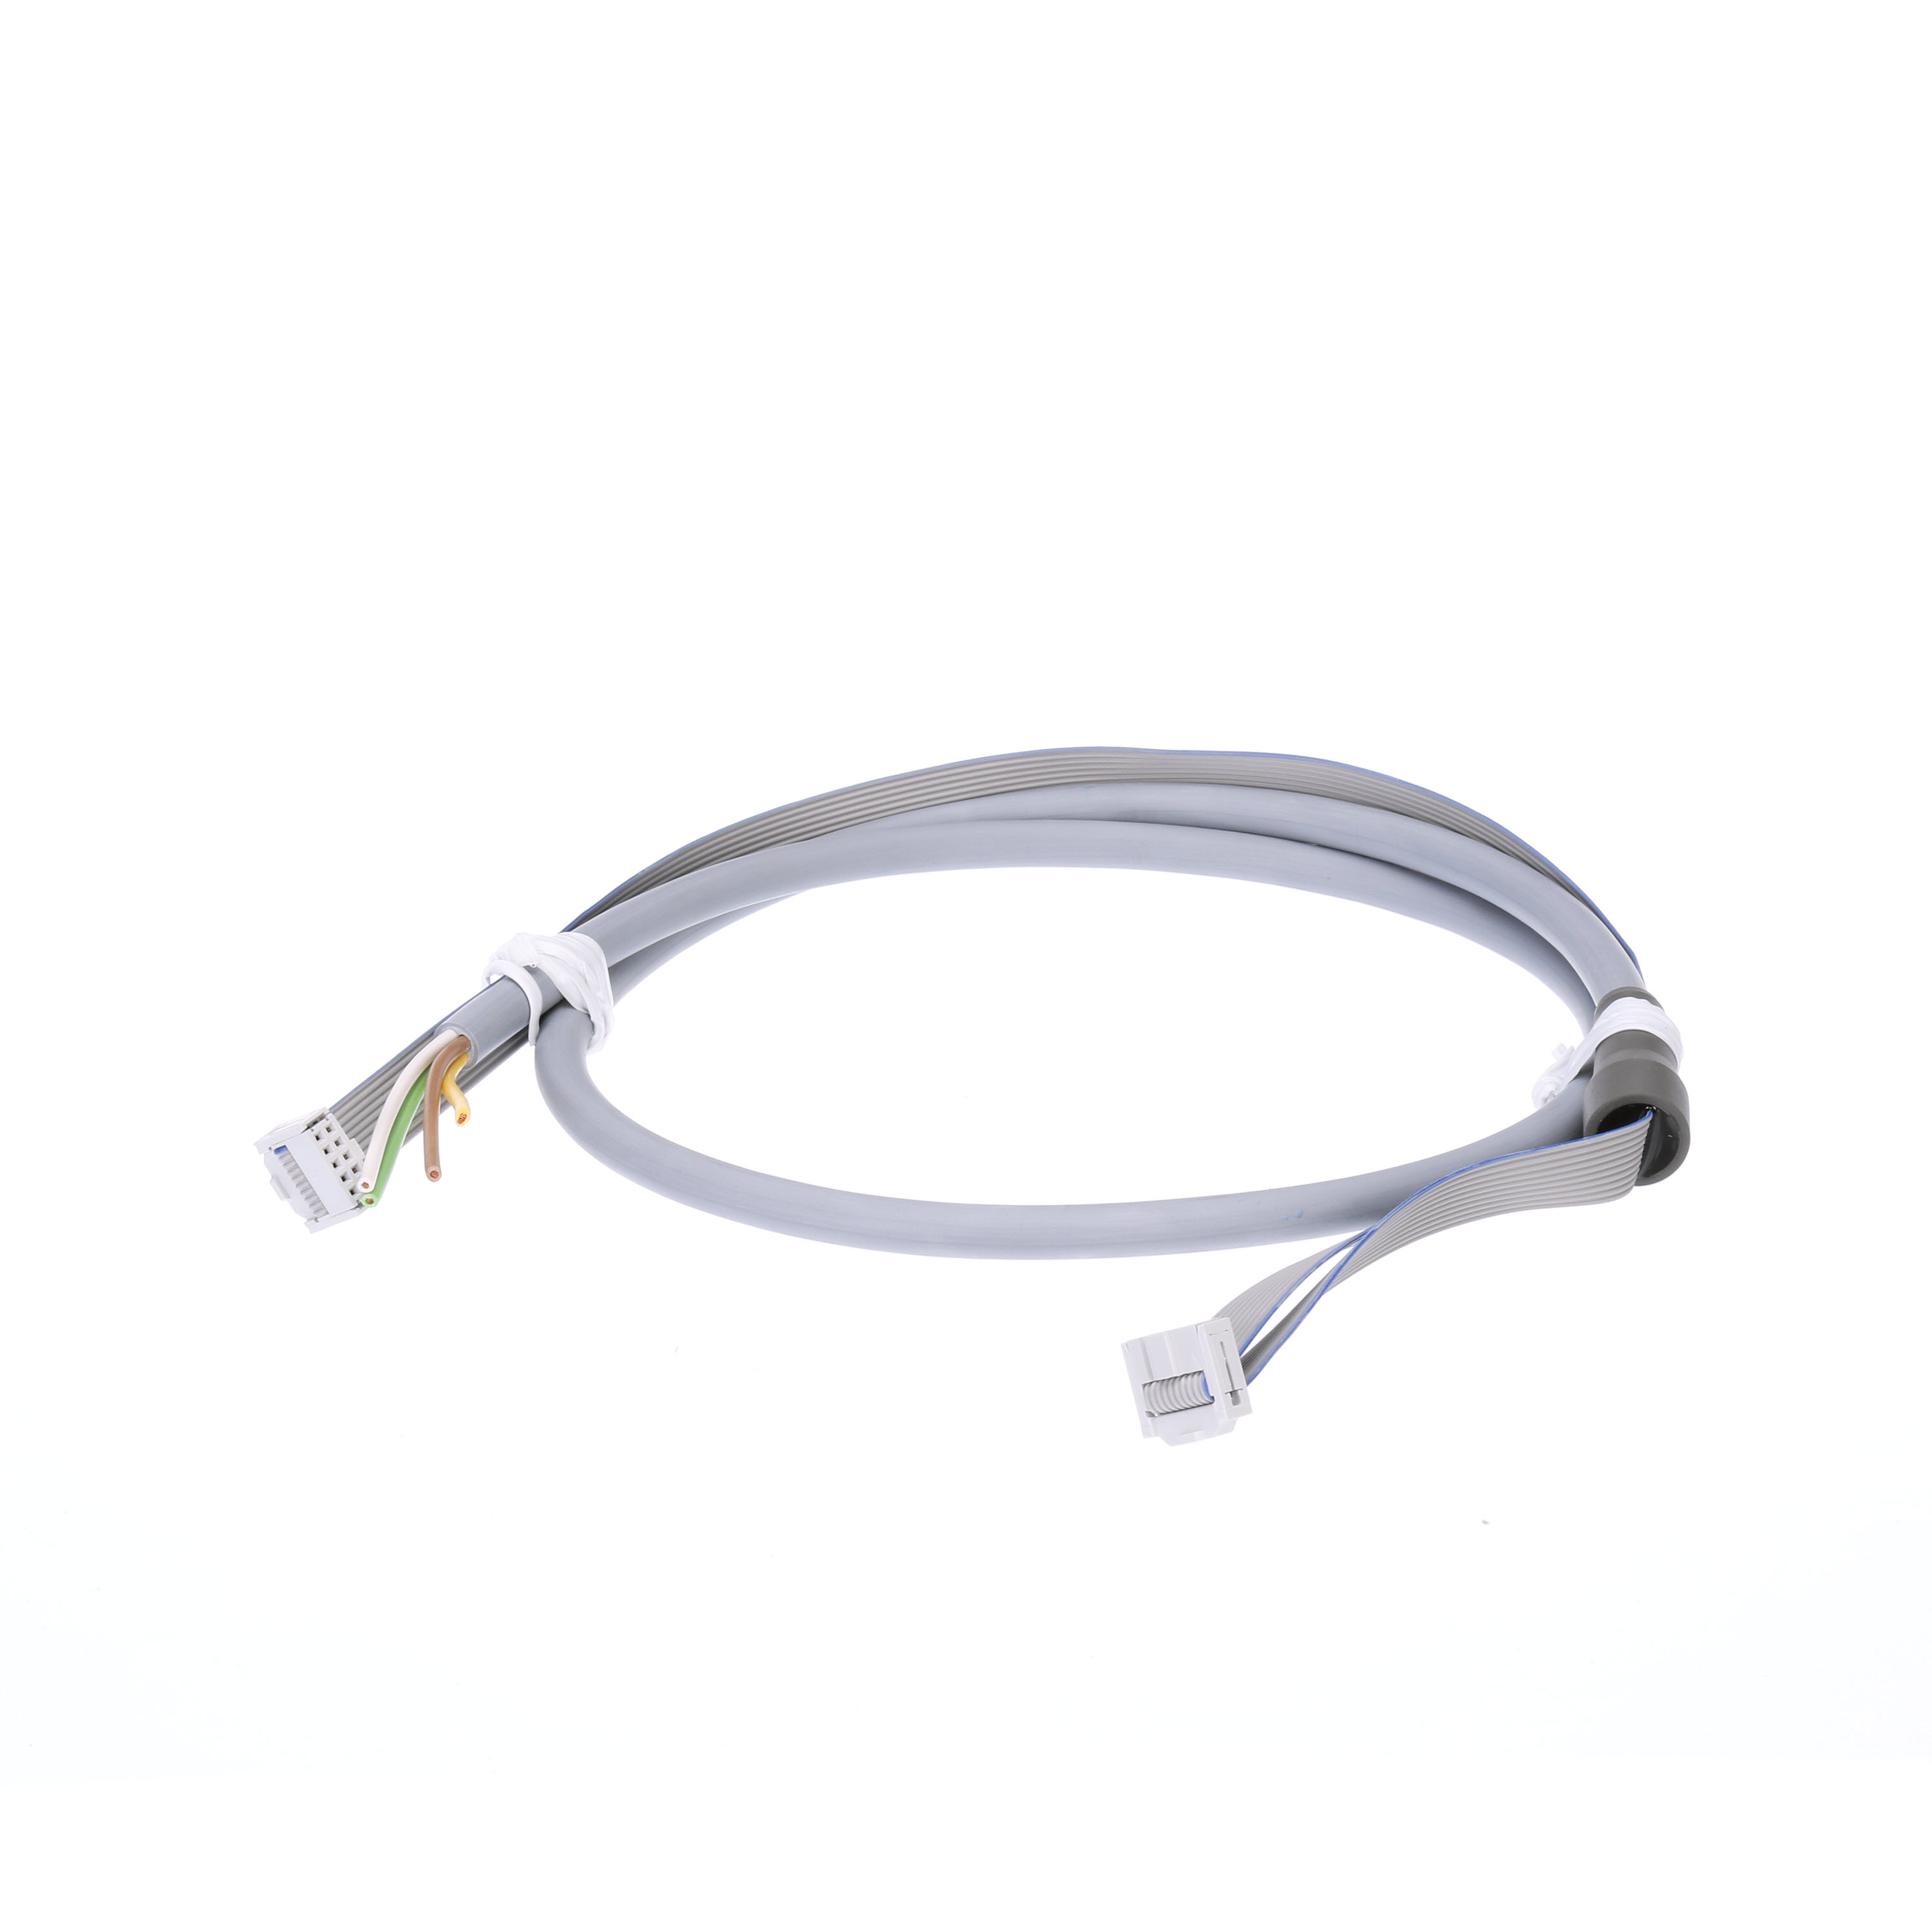 Y connection cable for use in conjunction with the initialization module length0.5m / 1.0m connects basic unit, current or current-voltage detection module and initialization module